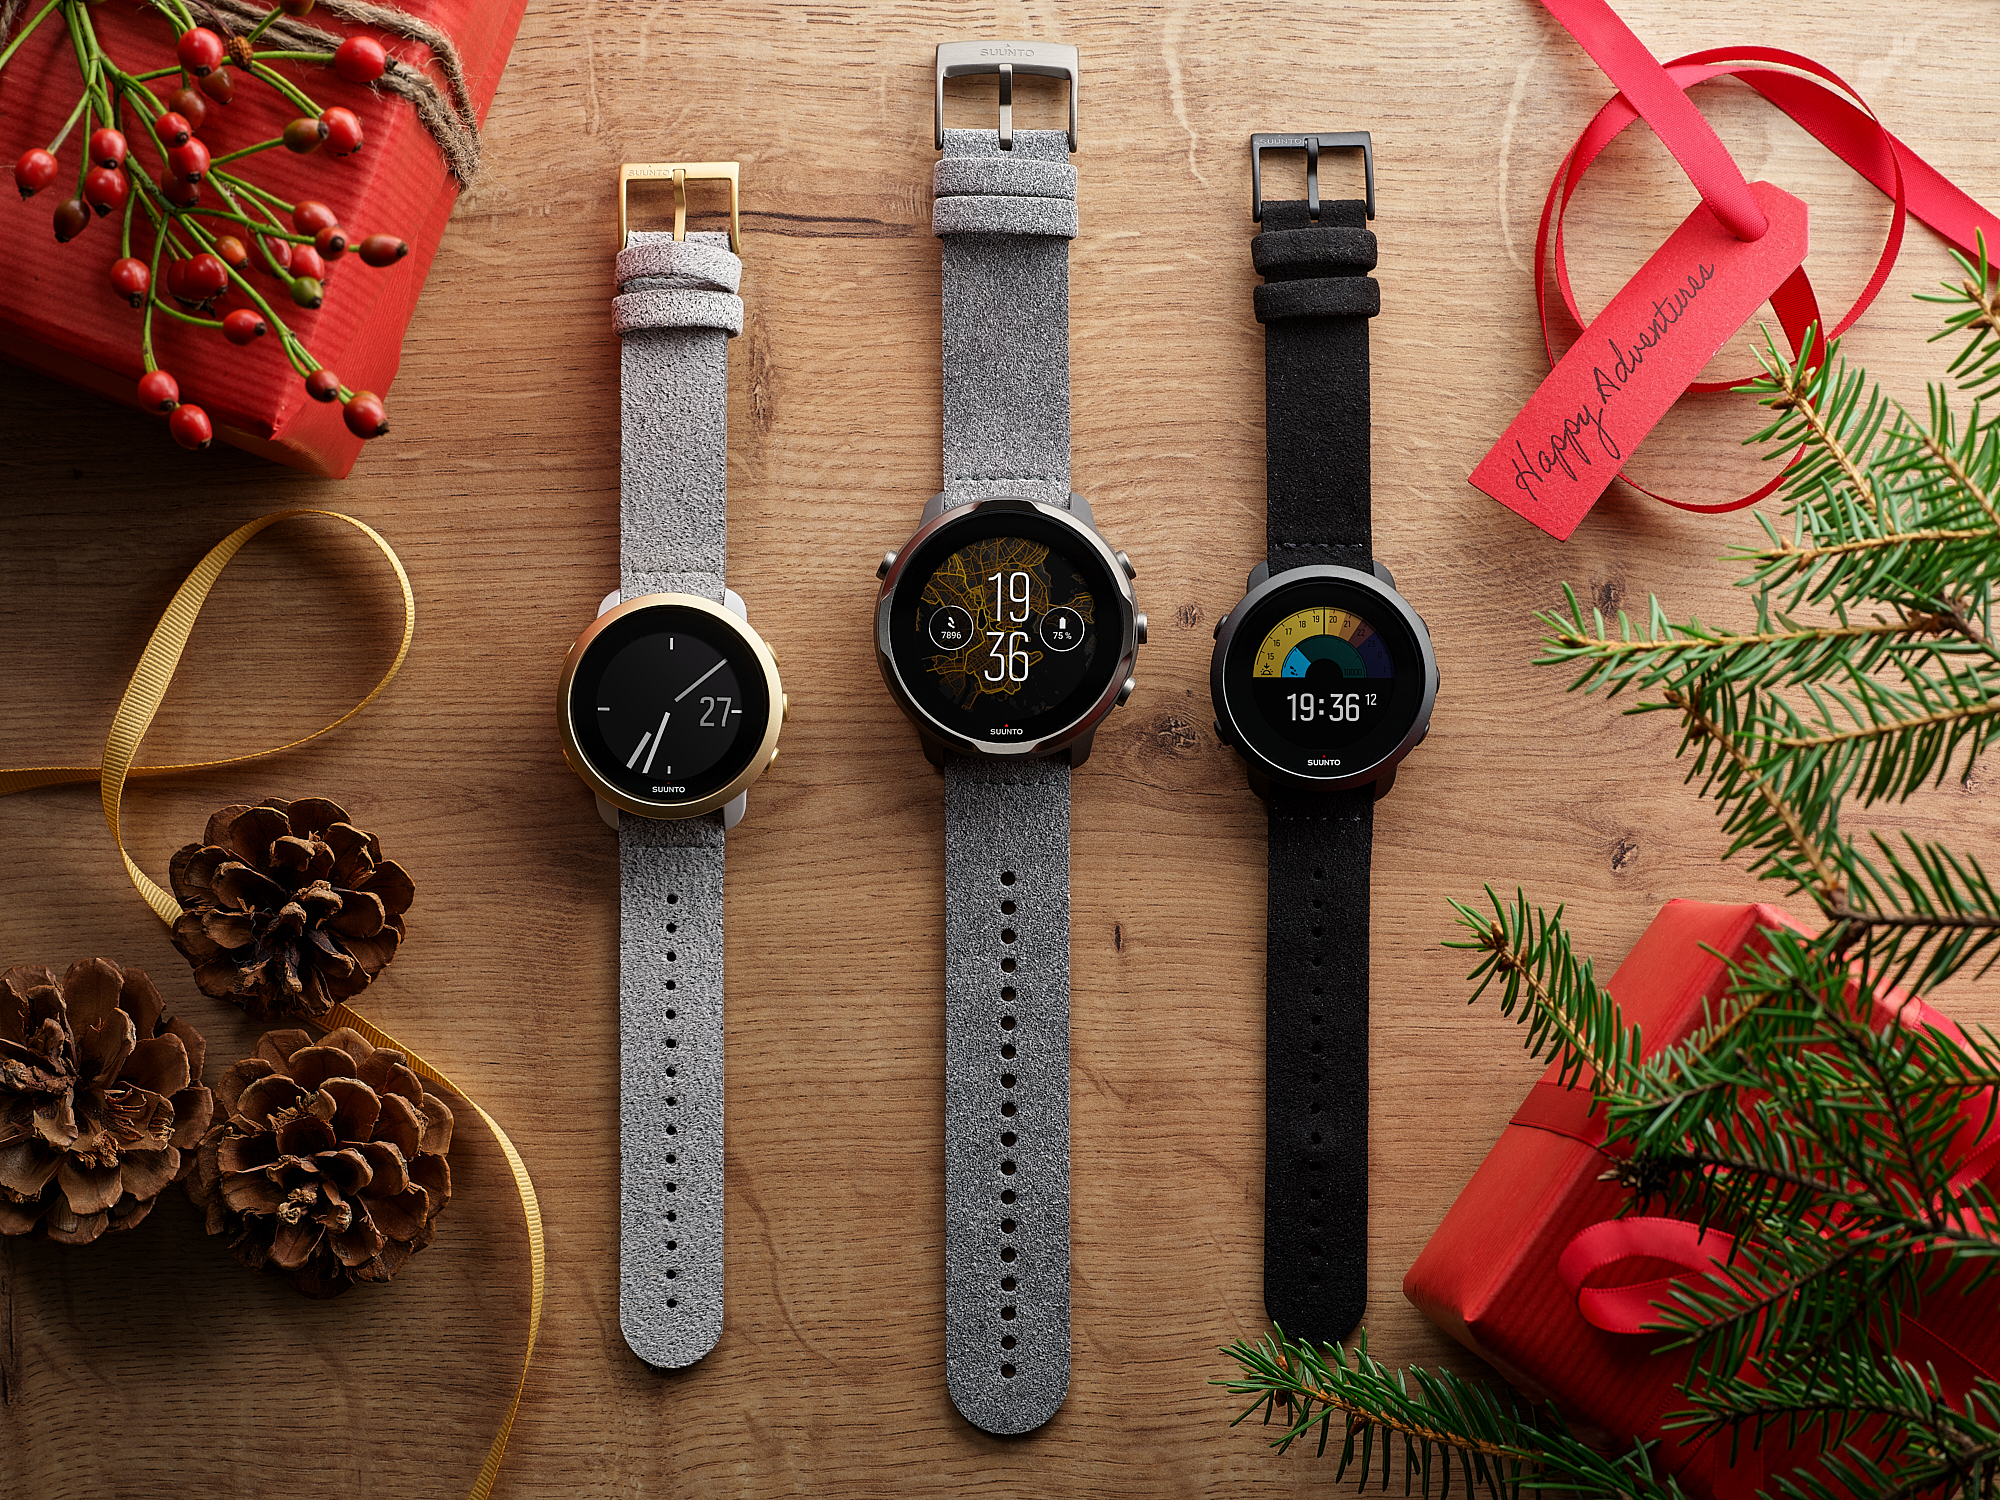 Style and Function blends in Limited Edition Suunto 7, Suunto 3 Launch